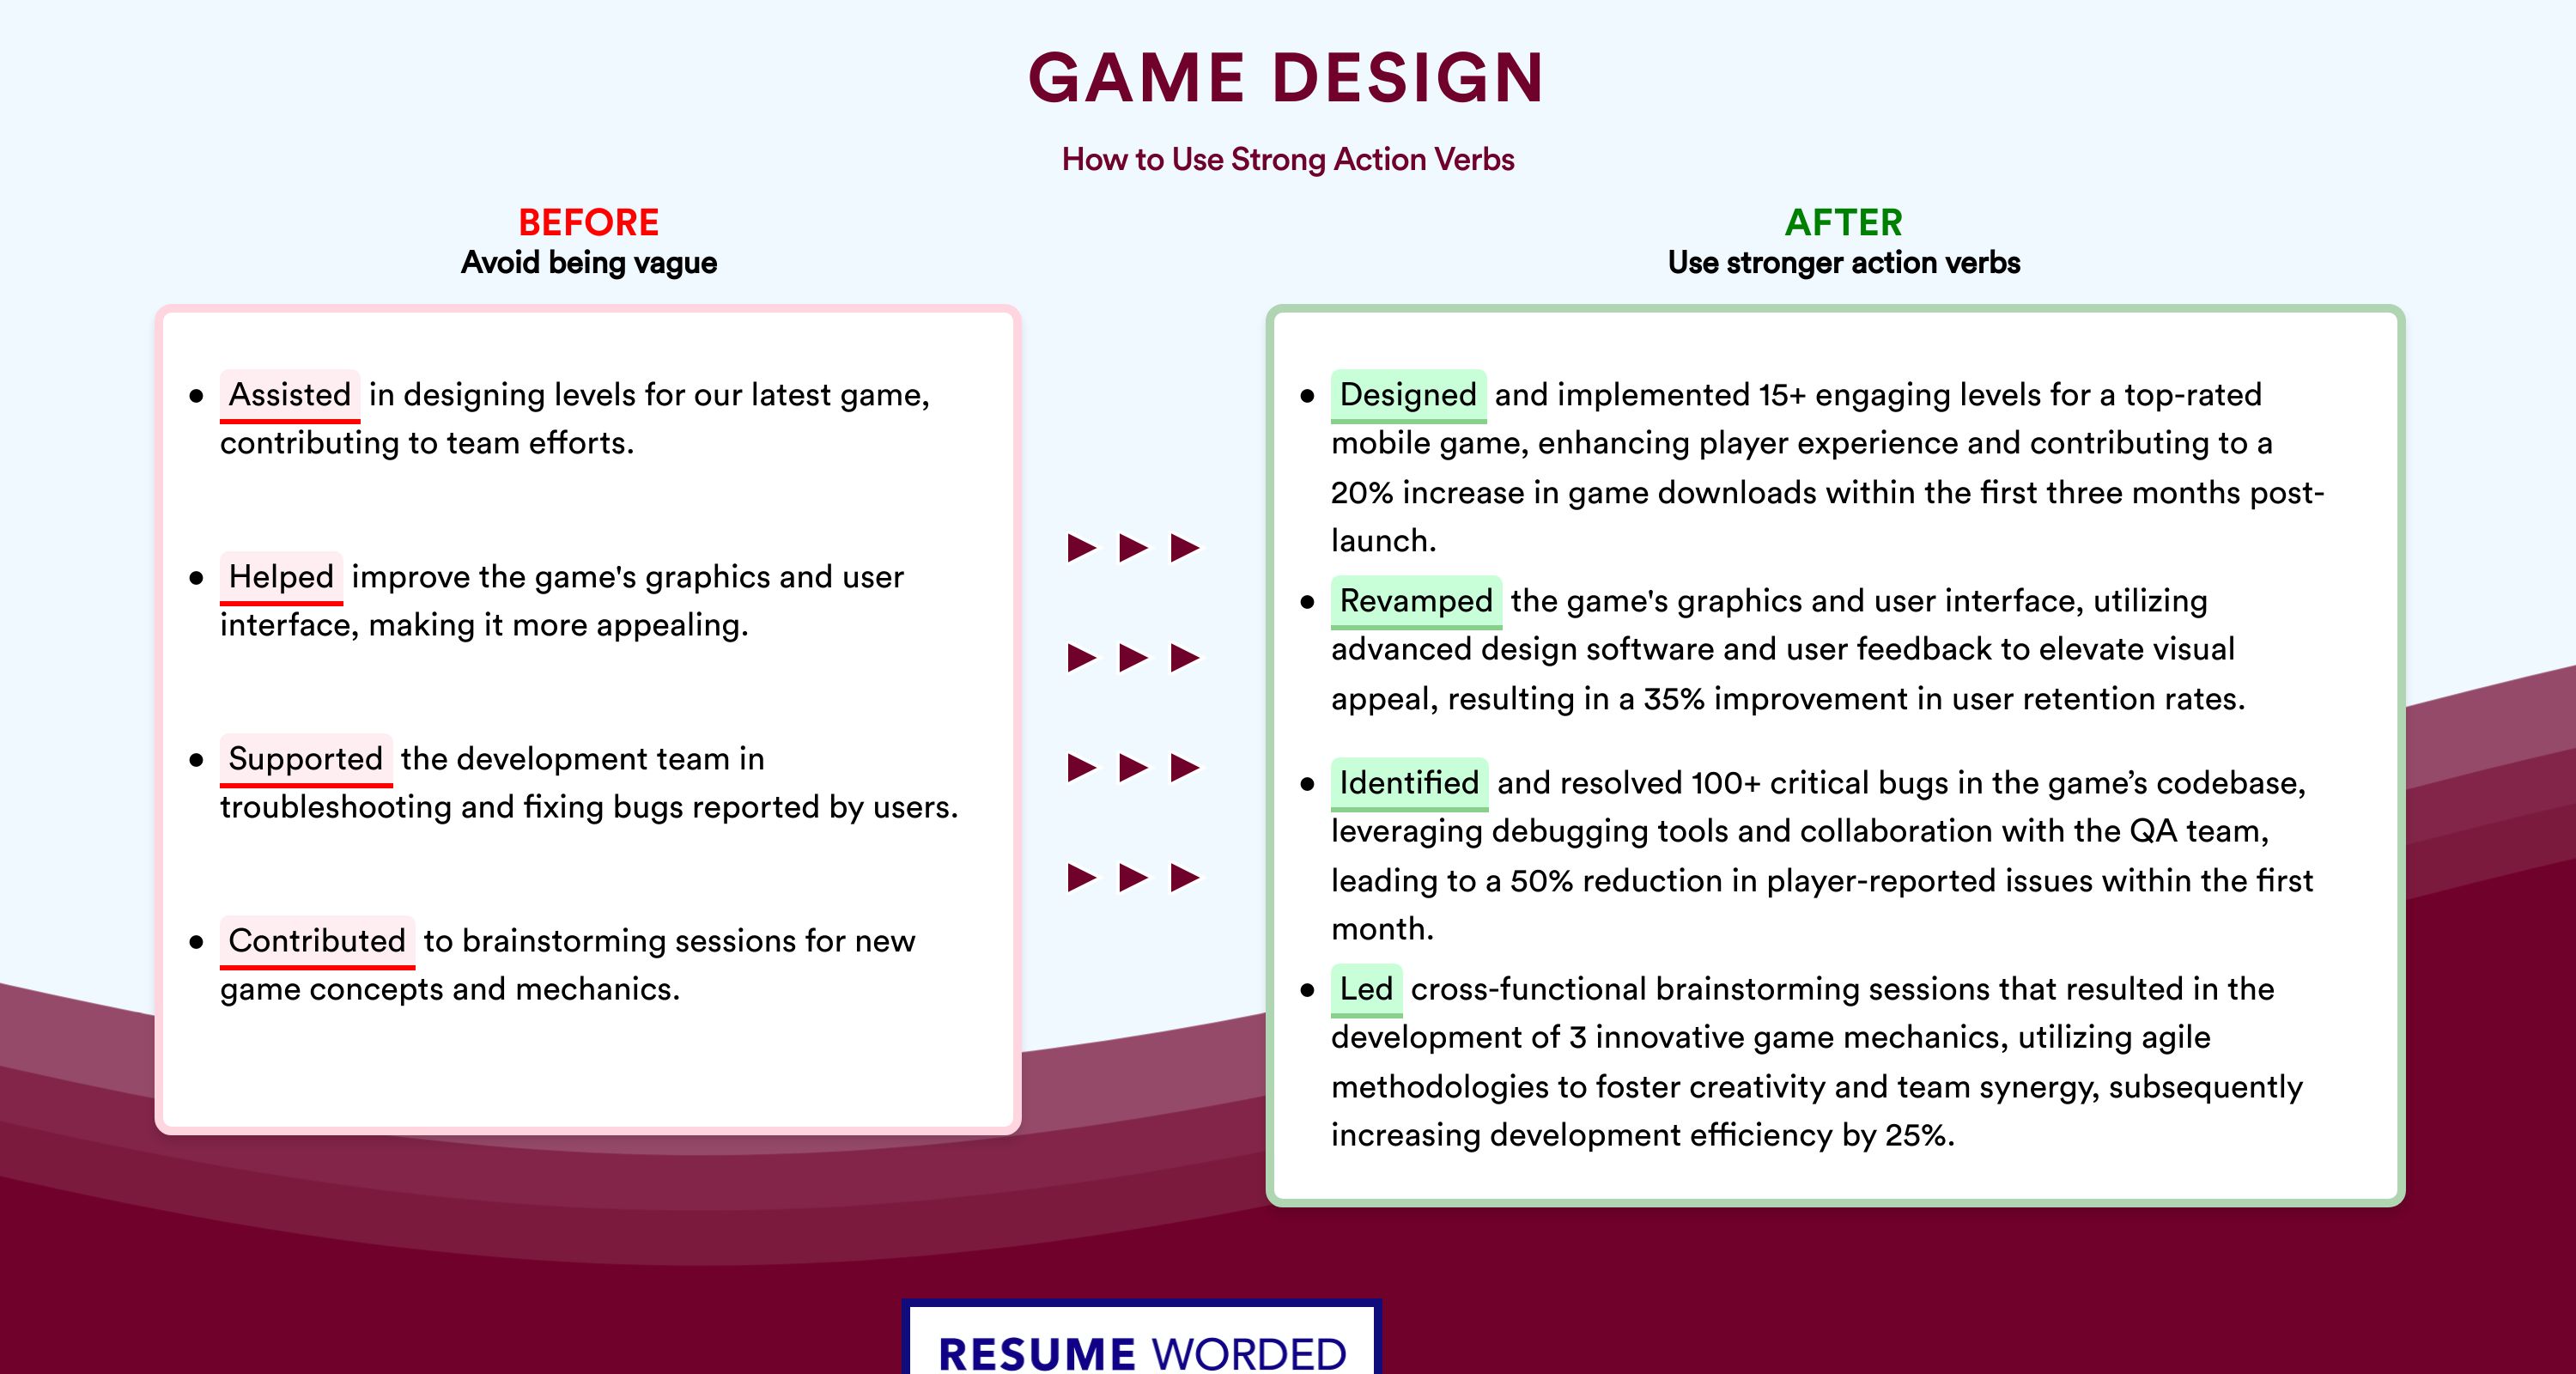 Action Verbs for Game Design